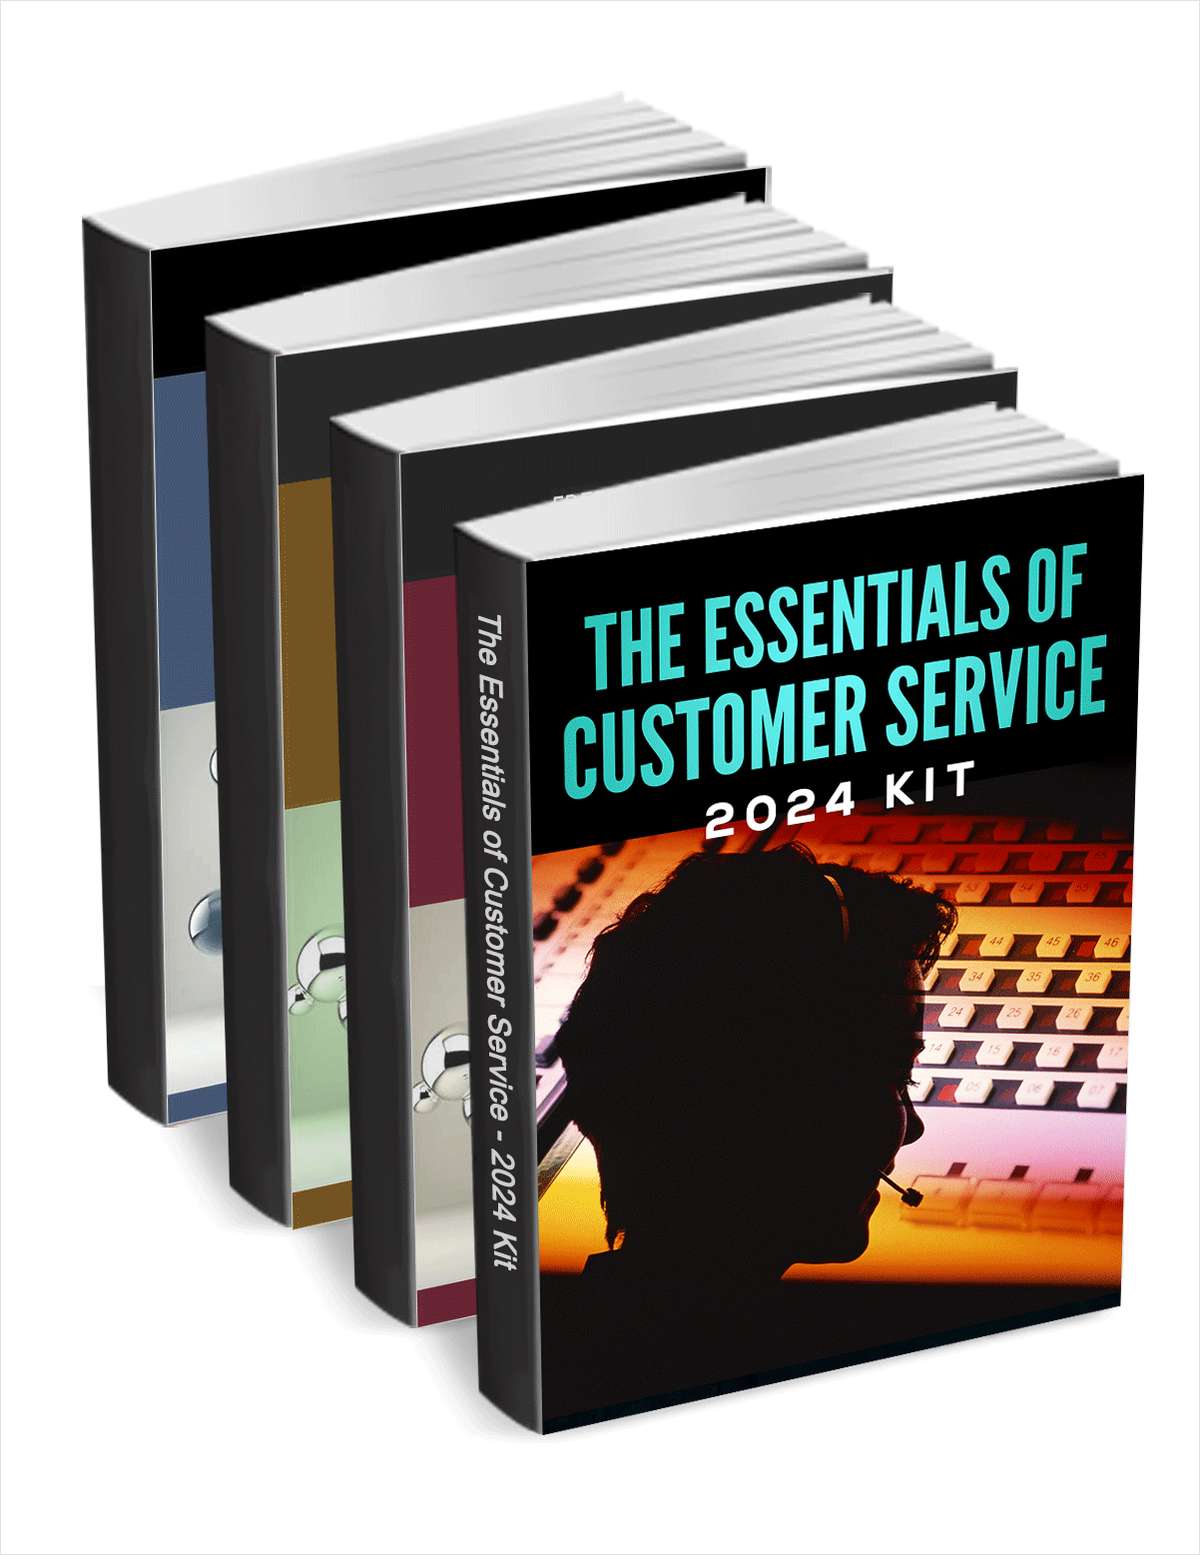 The Essentials of Customer Service - 2024 Kit